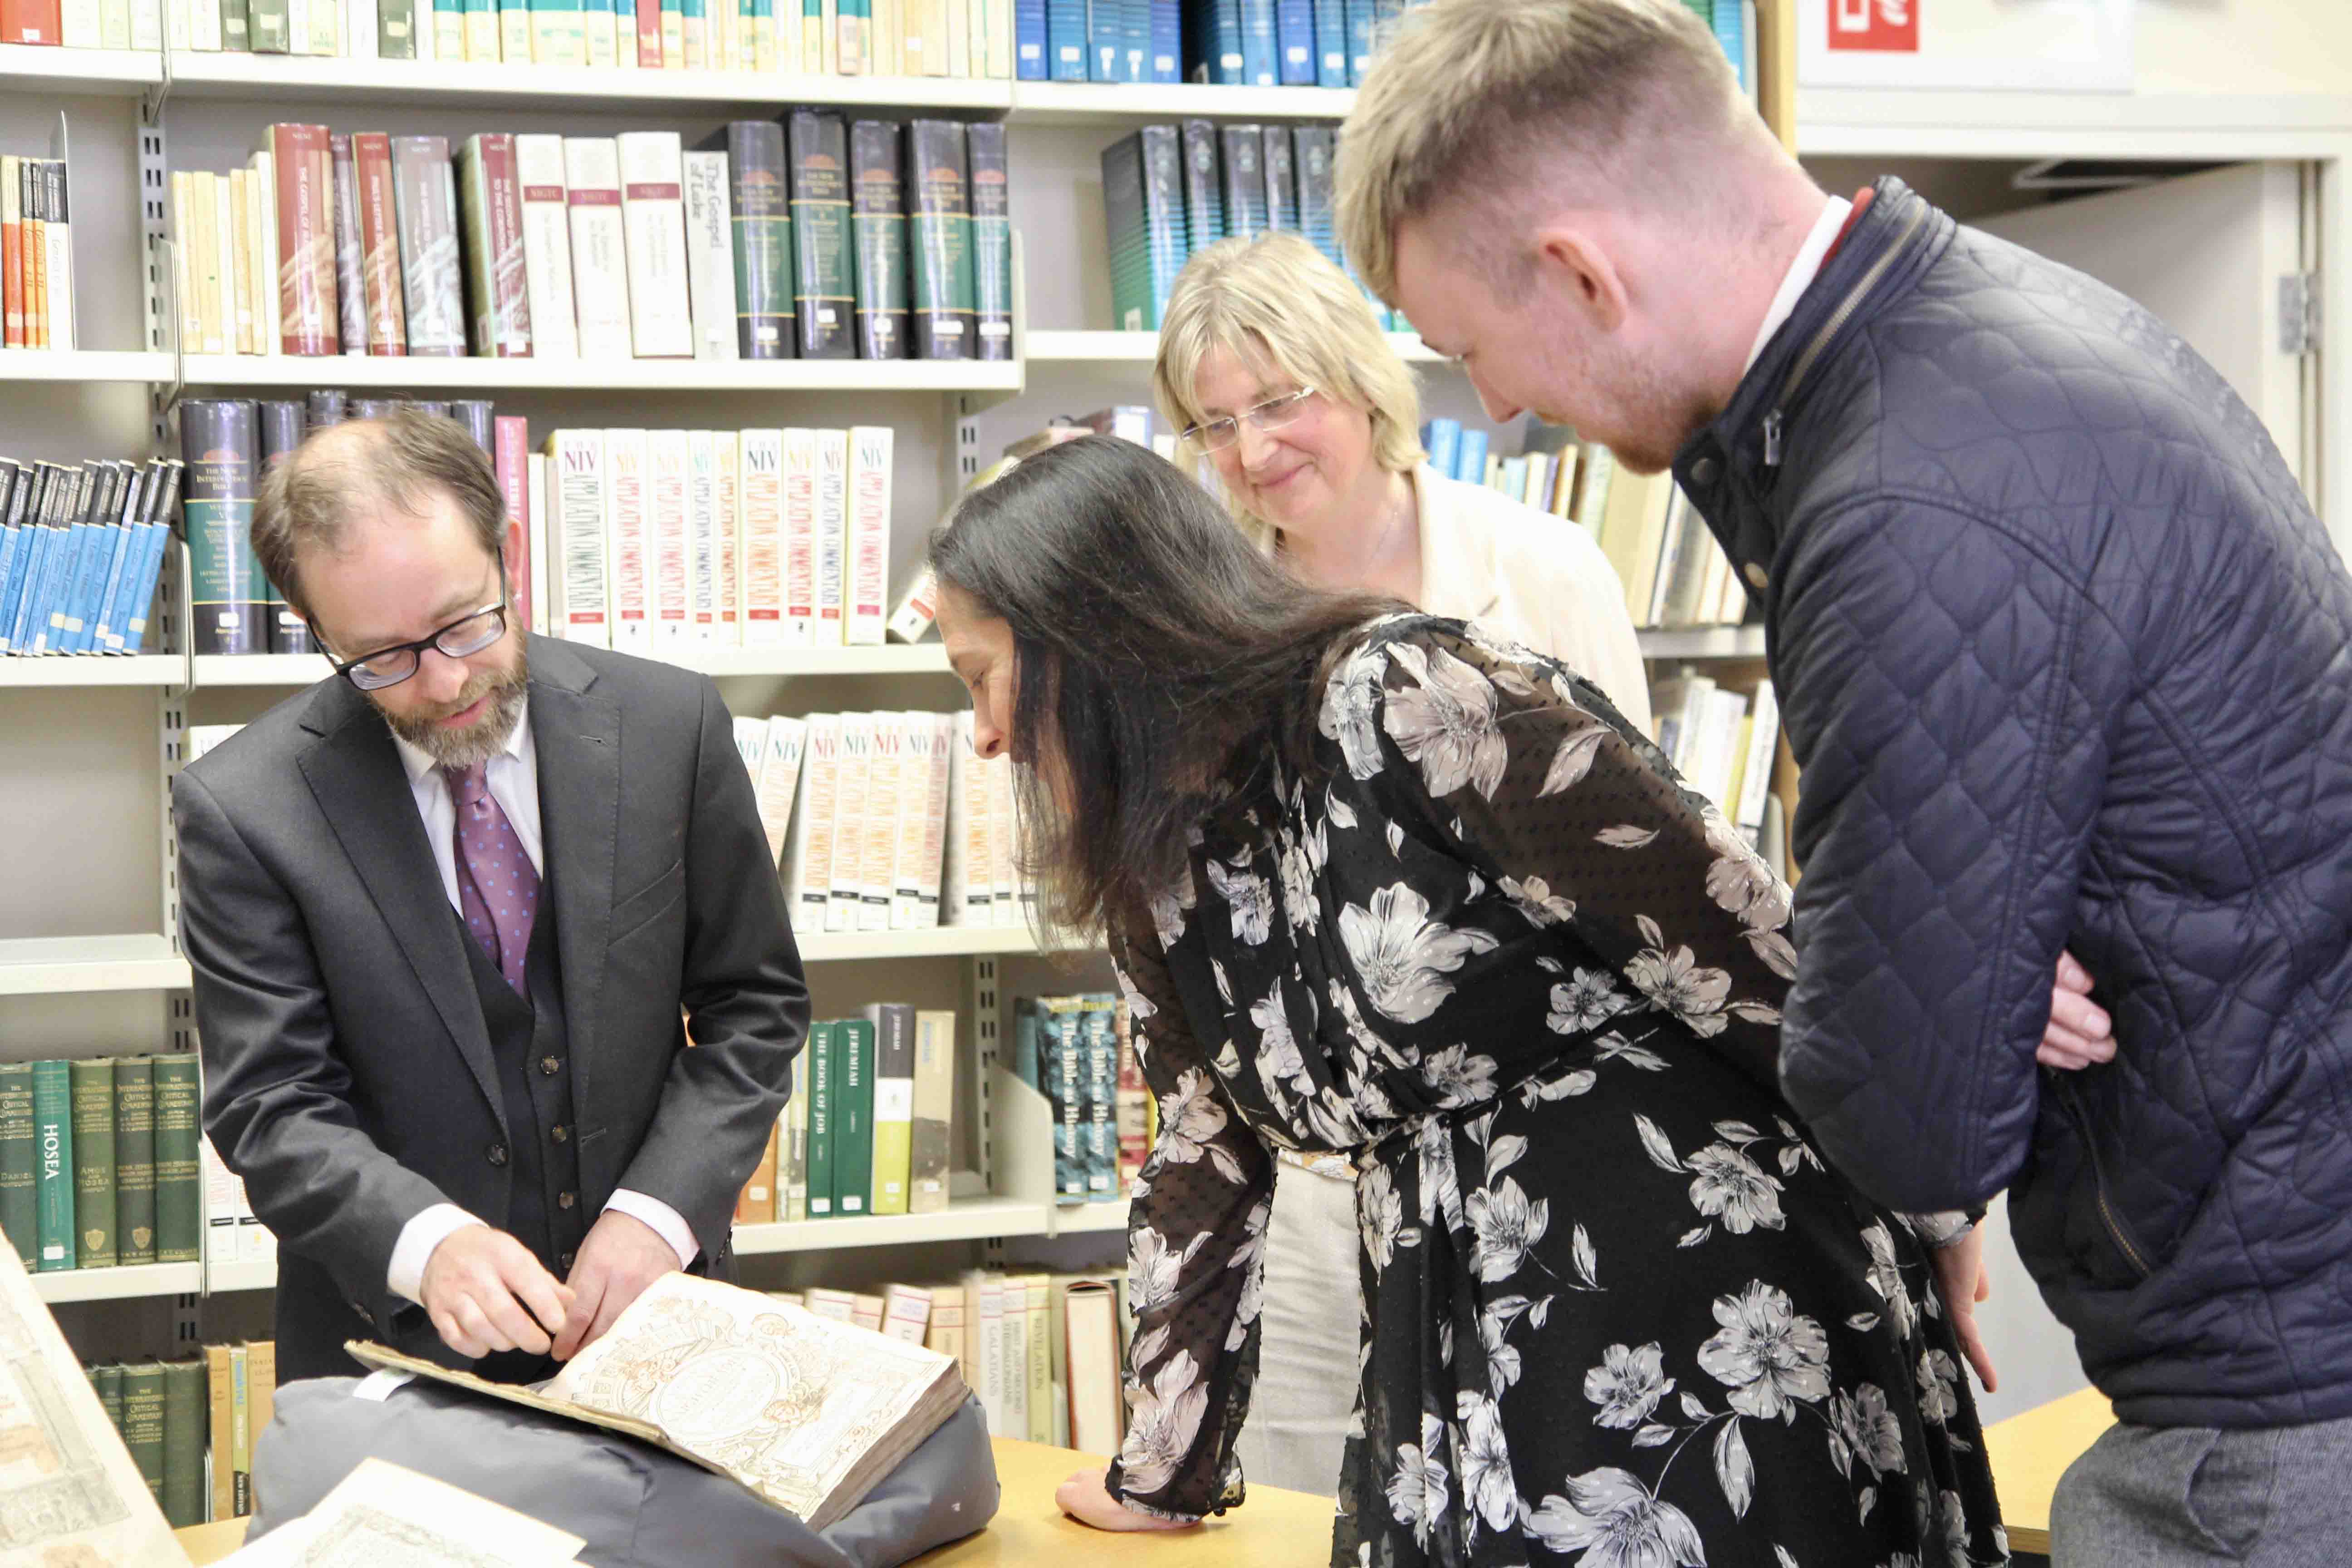 Bryan Whelan shows Minister Catherine Martin and her staff rare editions of the Book of Common Prayer.